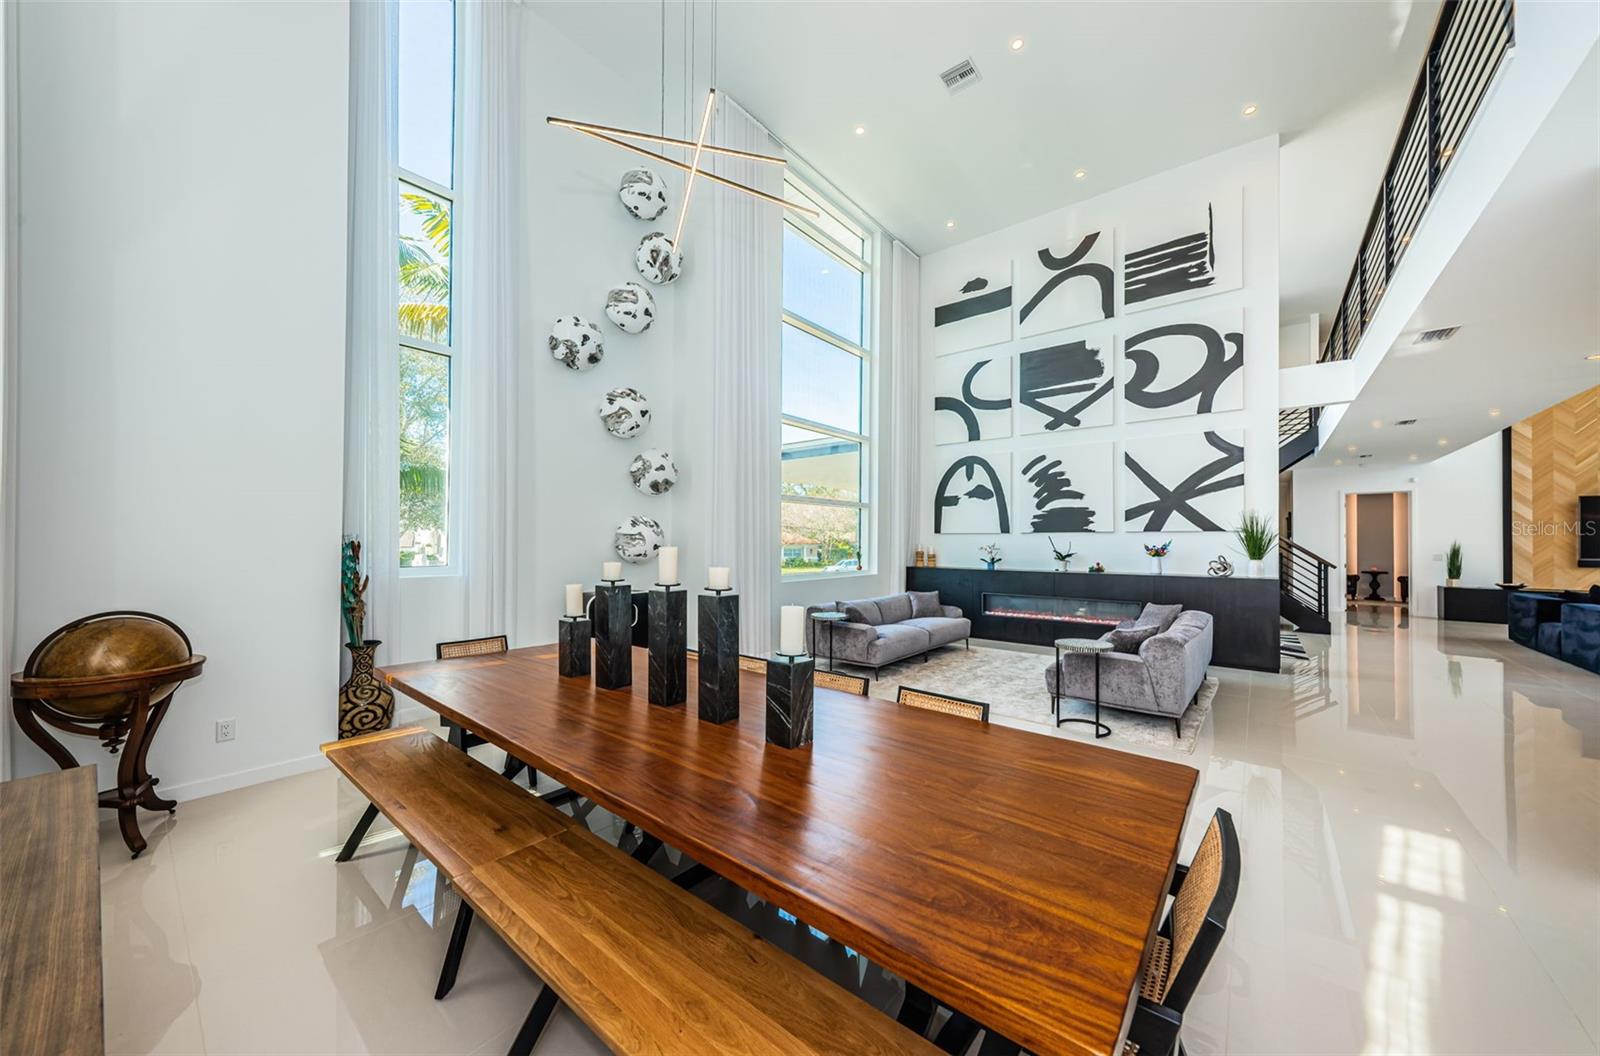 A fabulous Entertaining / Dining space flows seamlessly from the Kitchen and Great Room.  Soaring ceilings, tons of natural light and a gas fireplace further enhance this wonderful space.